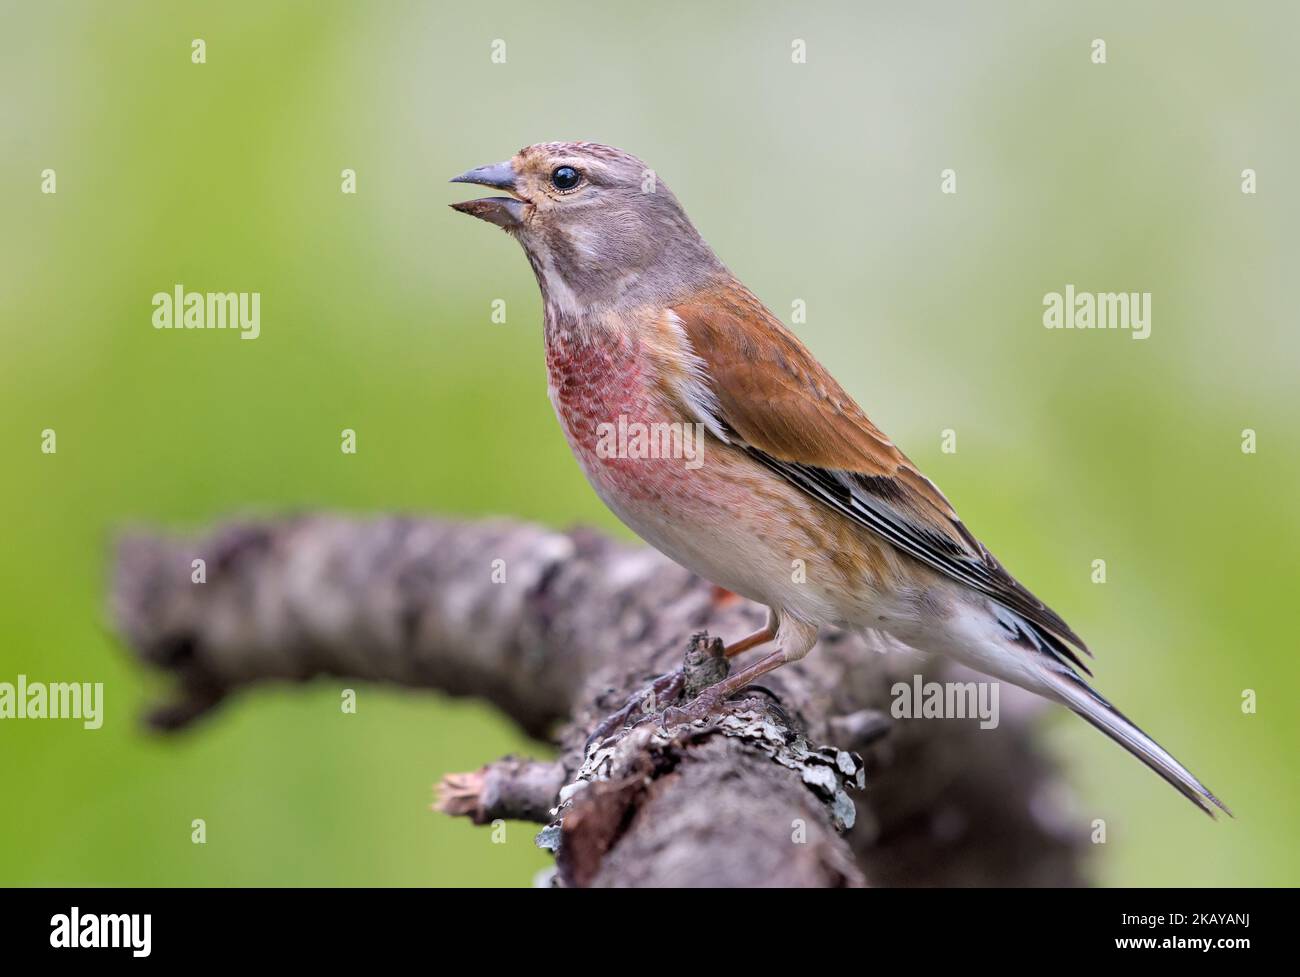 Common linnet (Linaria cannabina) sings on branch for warm photo in cloudy spring time Stock Photo